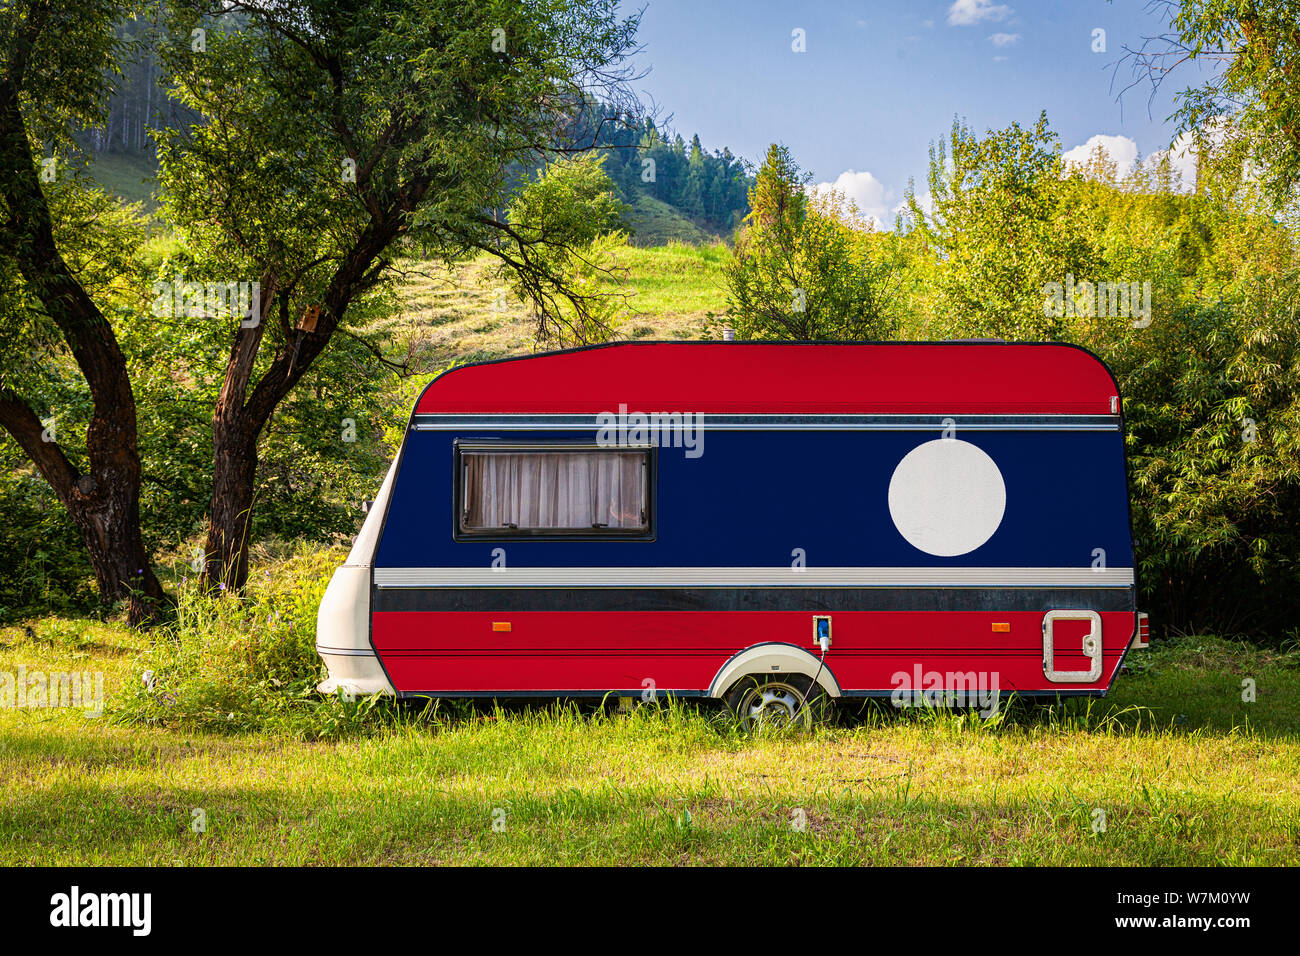 A car trailer, a motor home, painted in the national flag of Laos stands parked in a mountainous. The concept of road transport, trade, export and imp Stock Photo